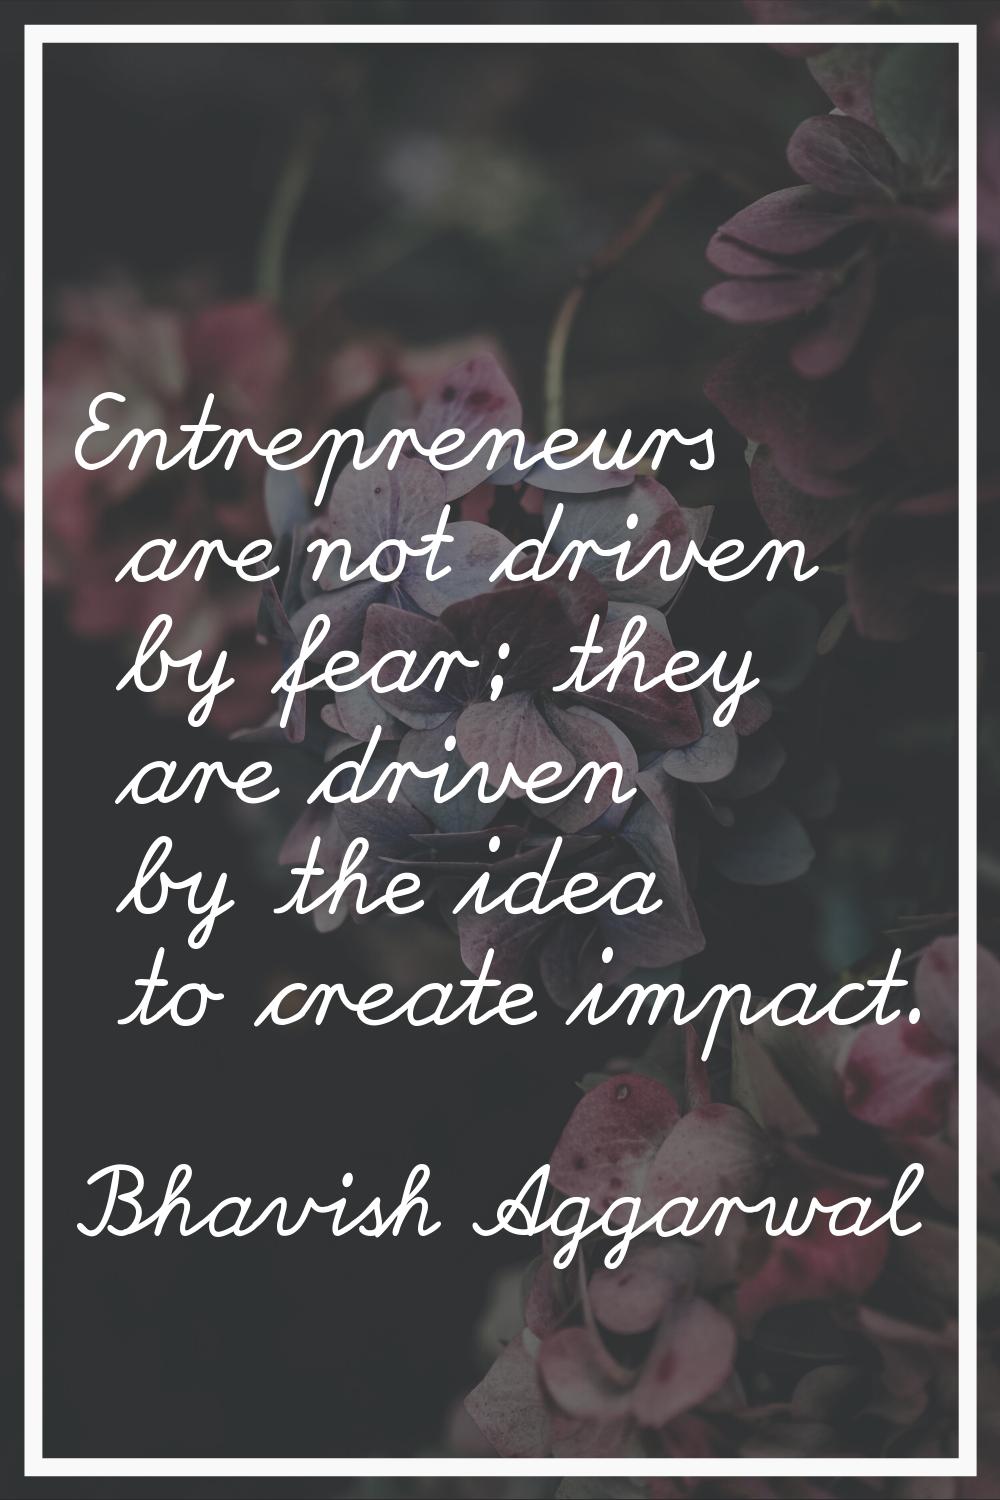 Entrepreneurs are not driven by fear; they are driven by the idea to create impact.